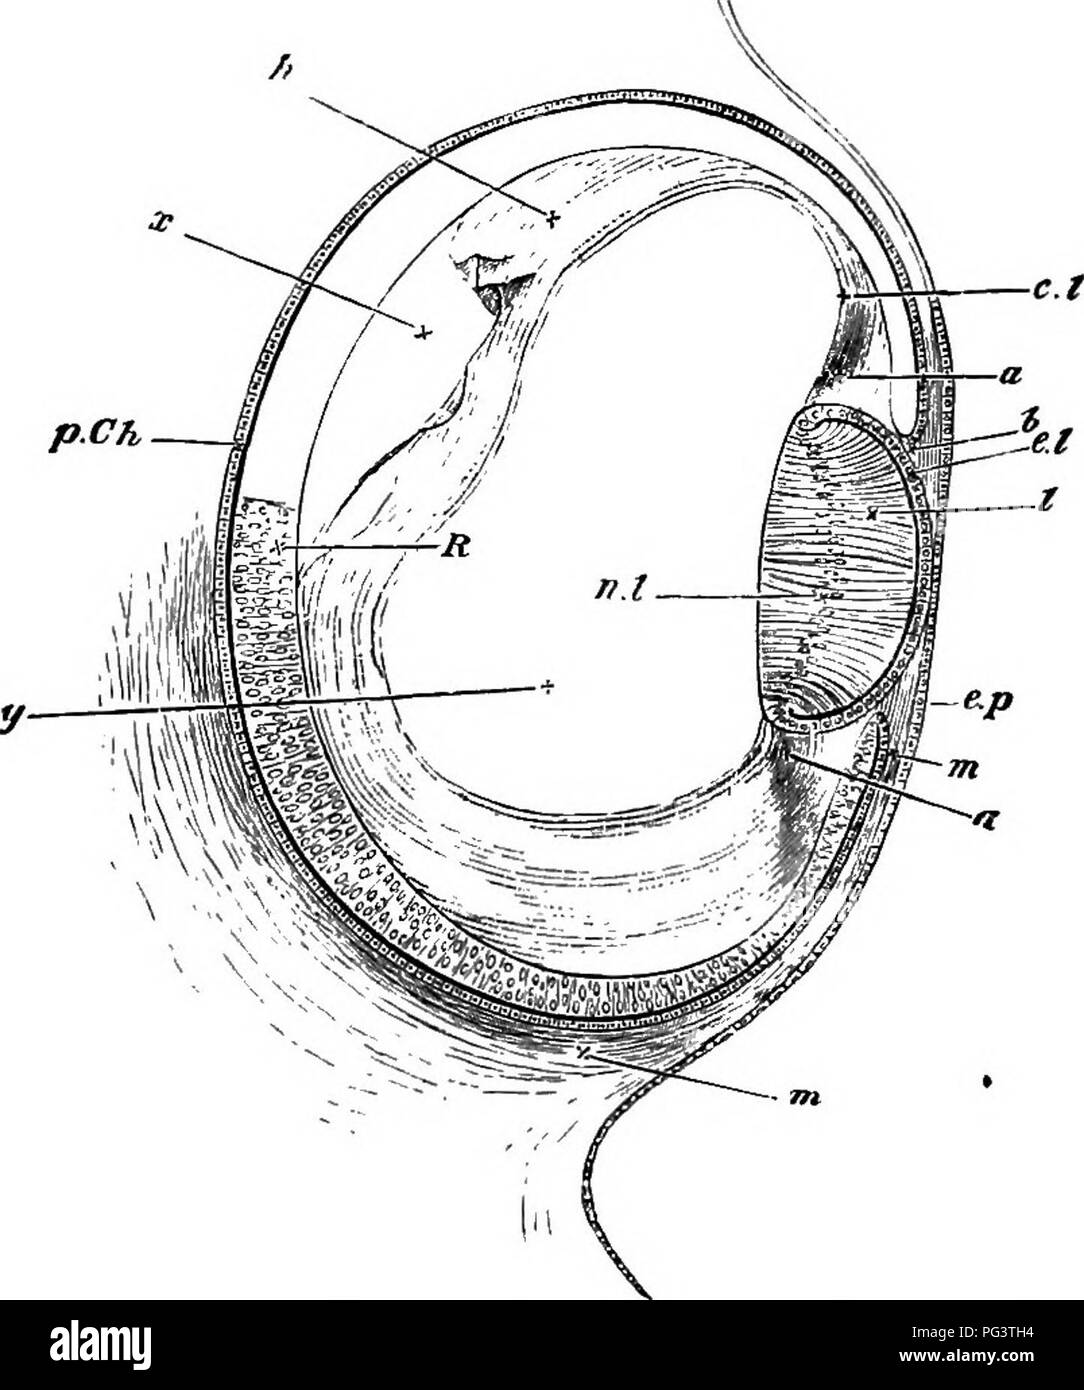 . The elements of embryology . Embryology. VI.J THE OPTIC VESICLE. Fig. 51. 143. Section of the Eyu or Chick at the Foubth Day. ep. superficial epiblast of the side of the head. R. true retina : anterior wall of the optic cup. p. Ch. pigment- epithelium of the choroid : posterior wall of the optic cup. b is placed at the extreme Up of the optic cup at what will become the margin of the iris. I. the lens. The hind wall, the nuclei of whose elongated cells are shewn at nl, now forms nearly the whole mass of the lens, the front wall being reduced to a layer of flattened cells el. m. the mesoblast Stock Photo